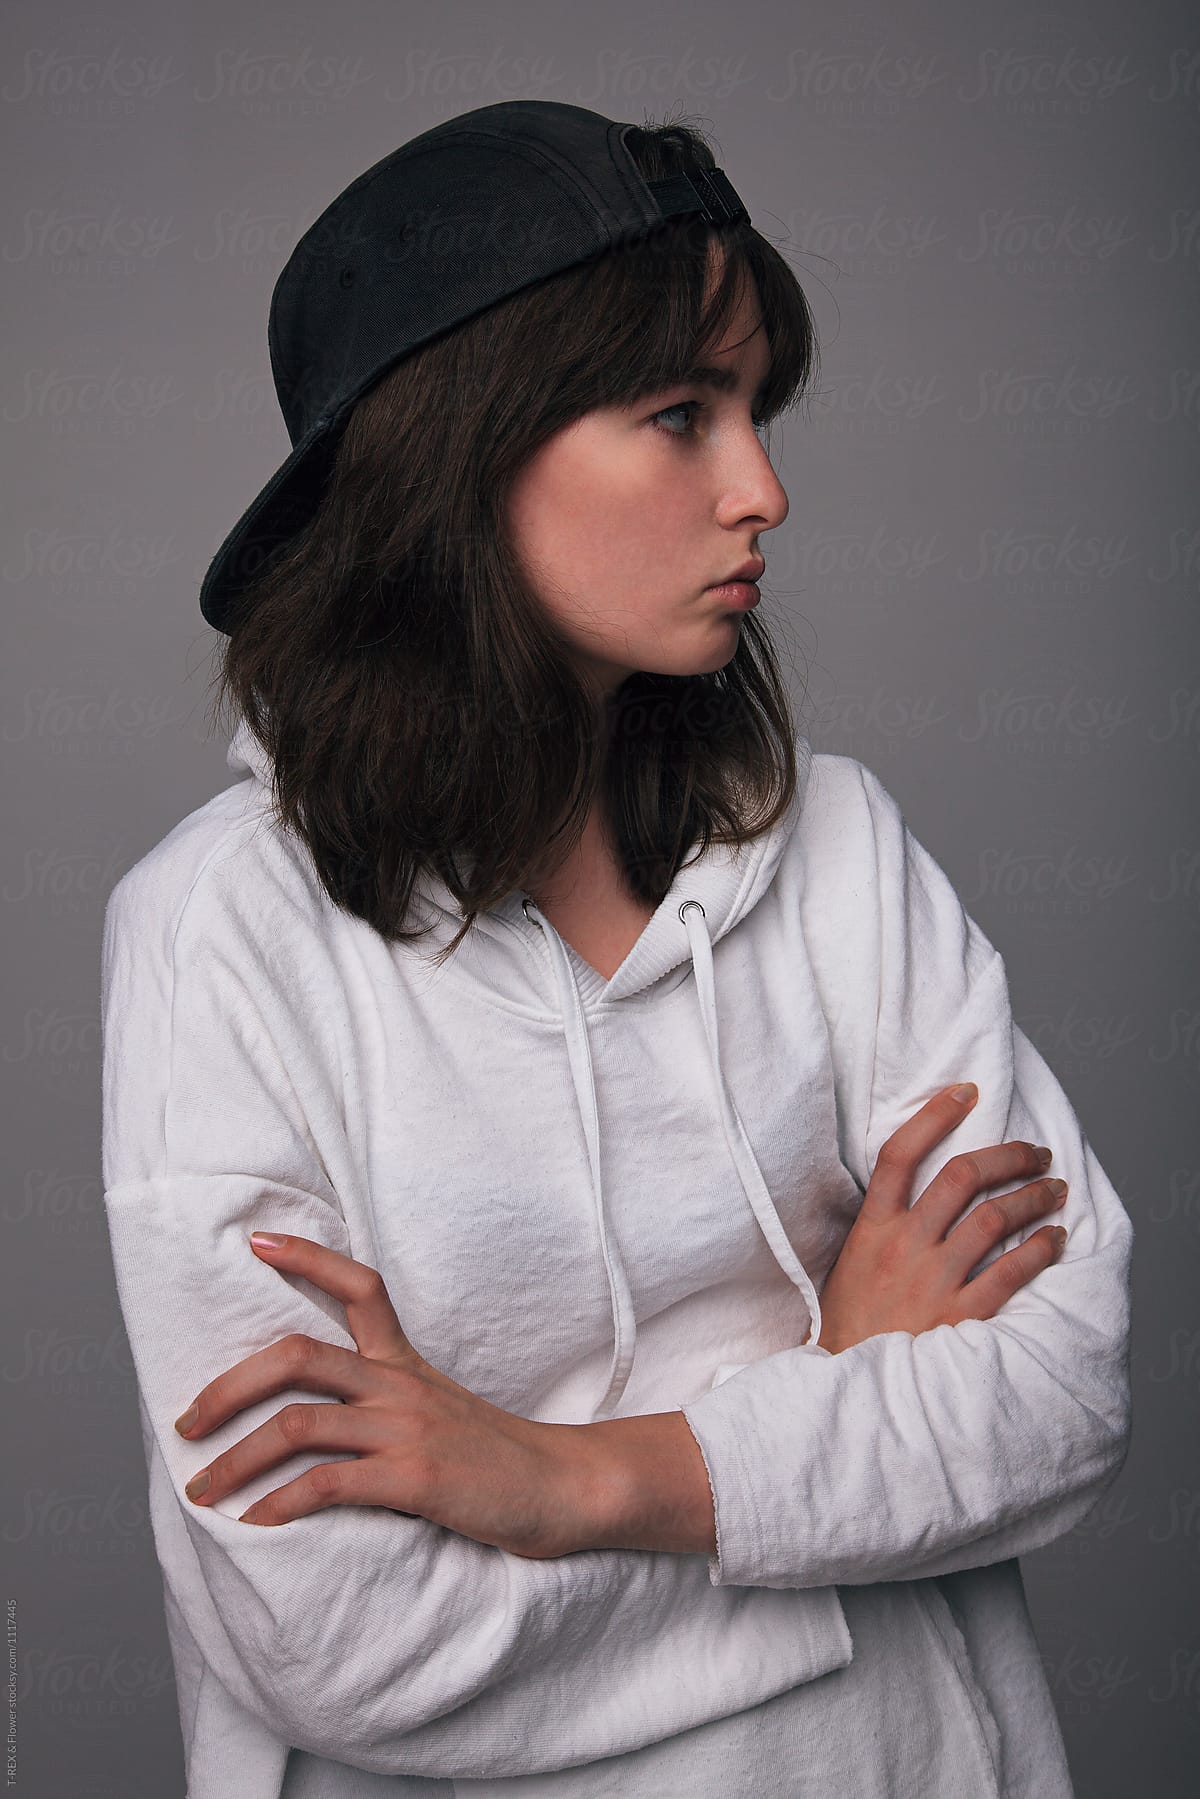 Teen Girl In Cap With Arms Folded Looking Away With Indifference By